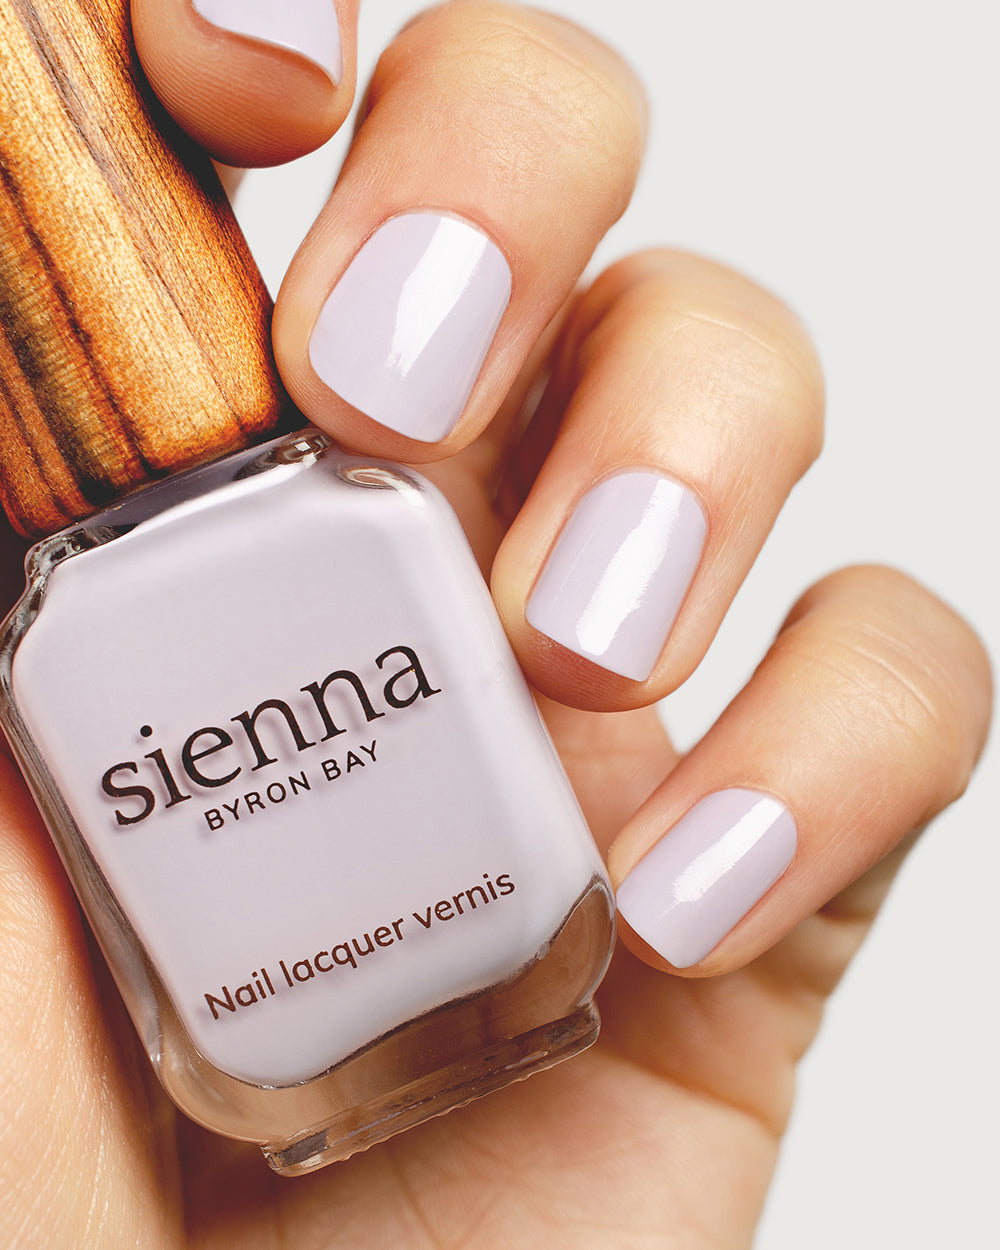 Pastel purple-grey nail polish hand swatch on fair skin tone holding a sienna bottle up close